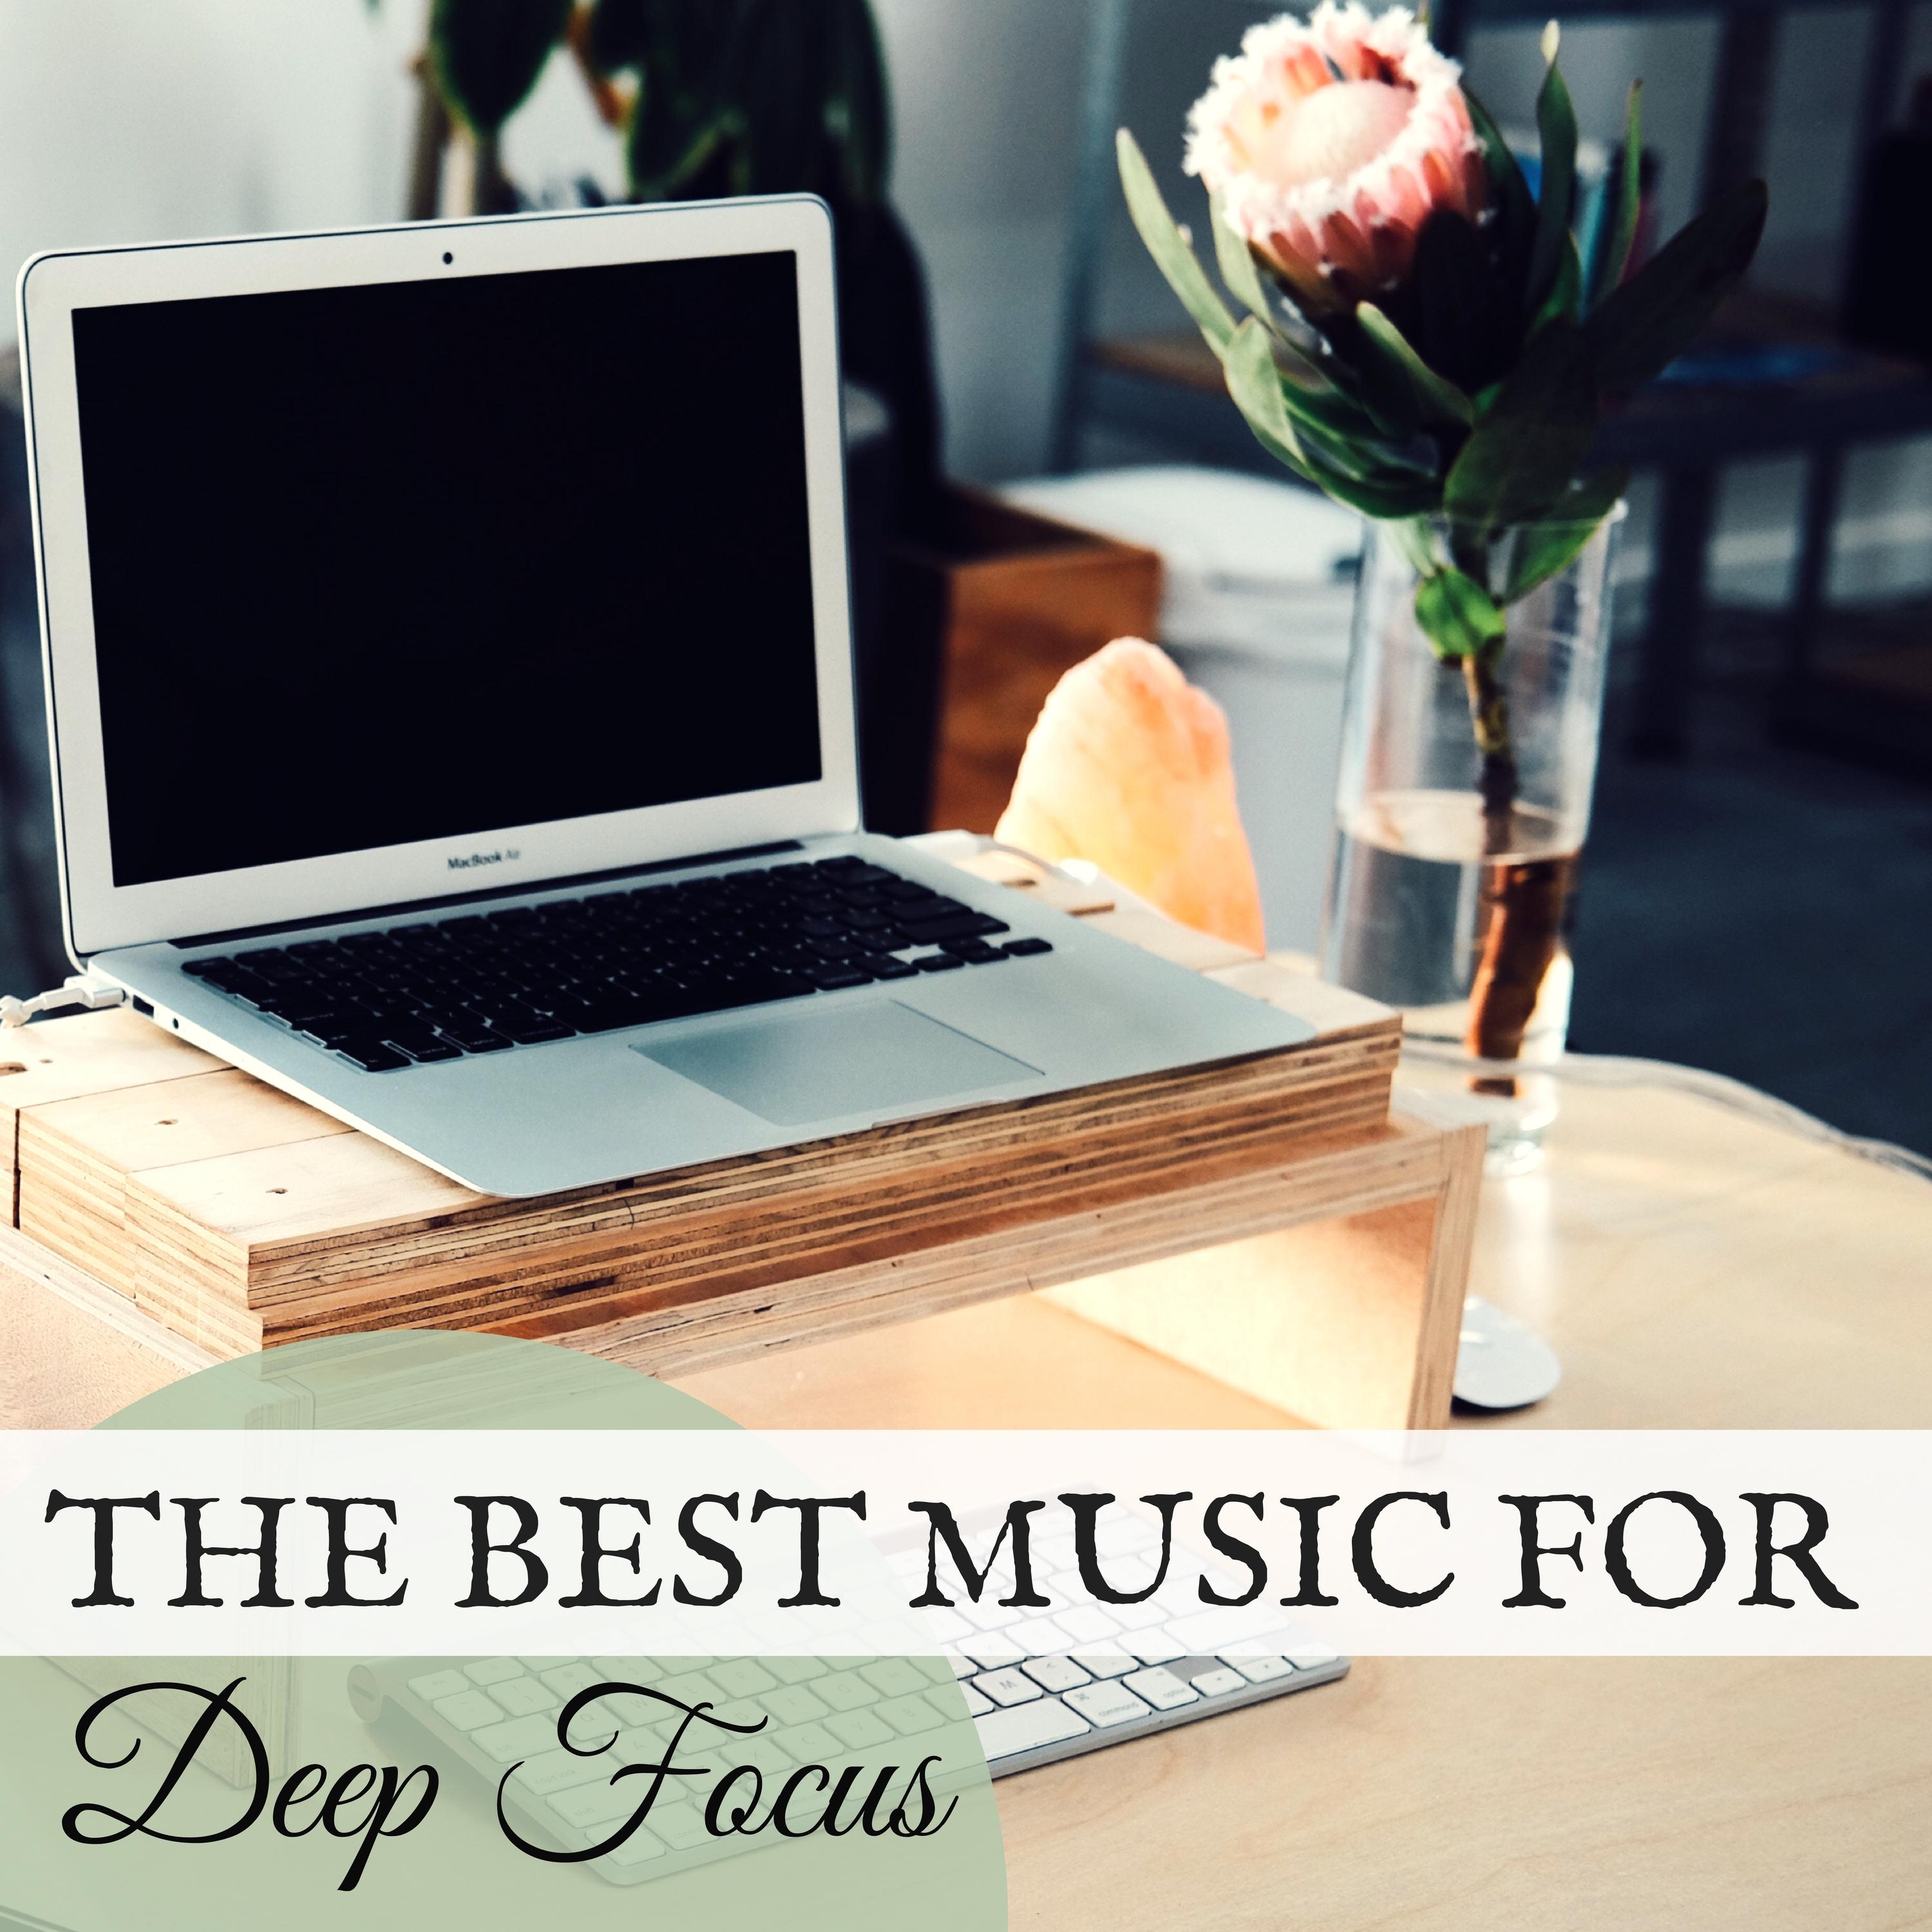 The Best Music for Deep Focus - Improve Concentration with Harmonic Workplace Sounds